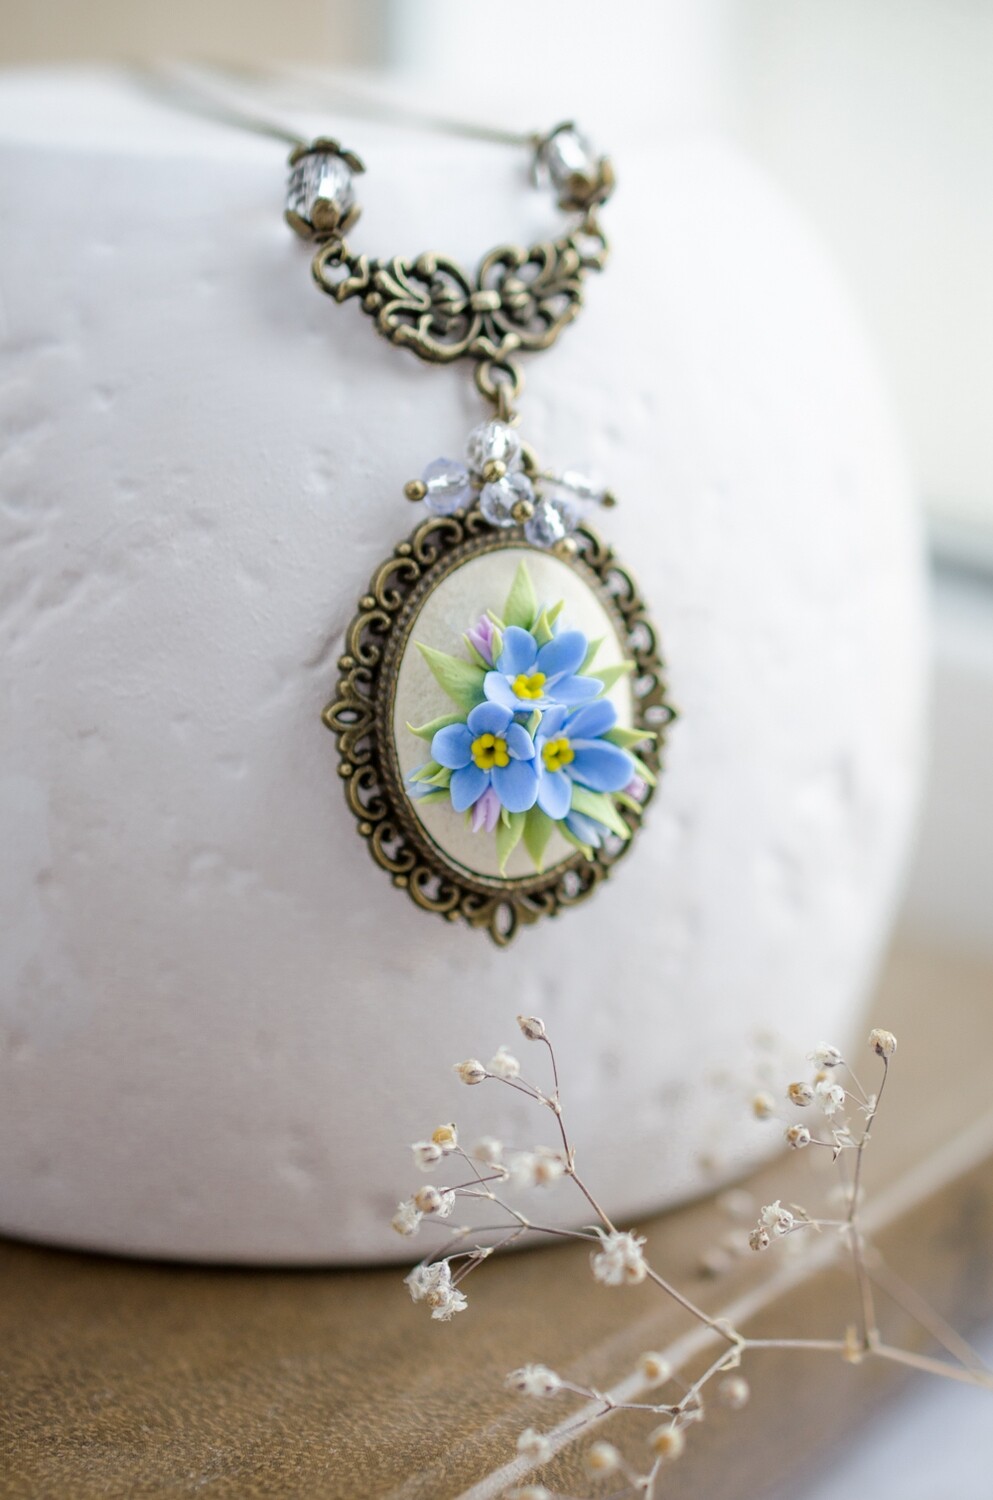 Forget me not necklace, Blue myosotis flowers pendant, mother's day gift